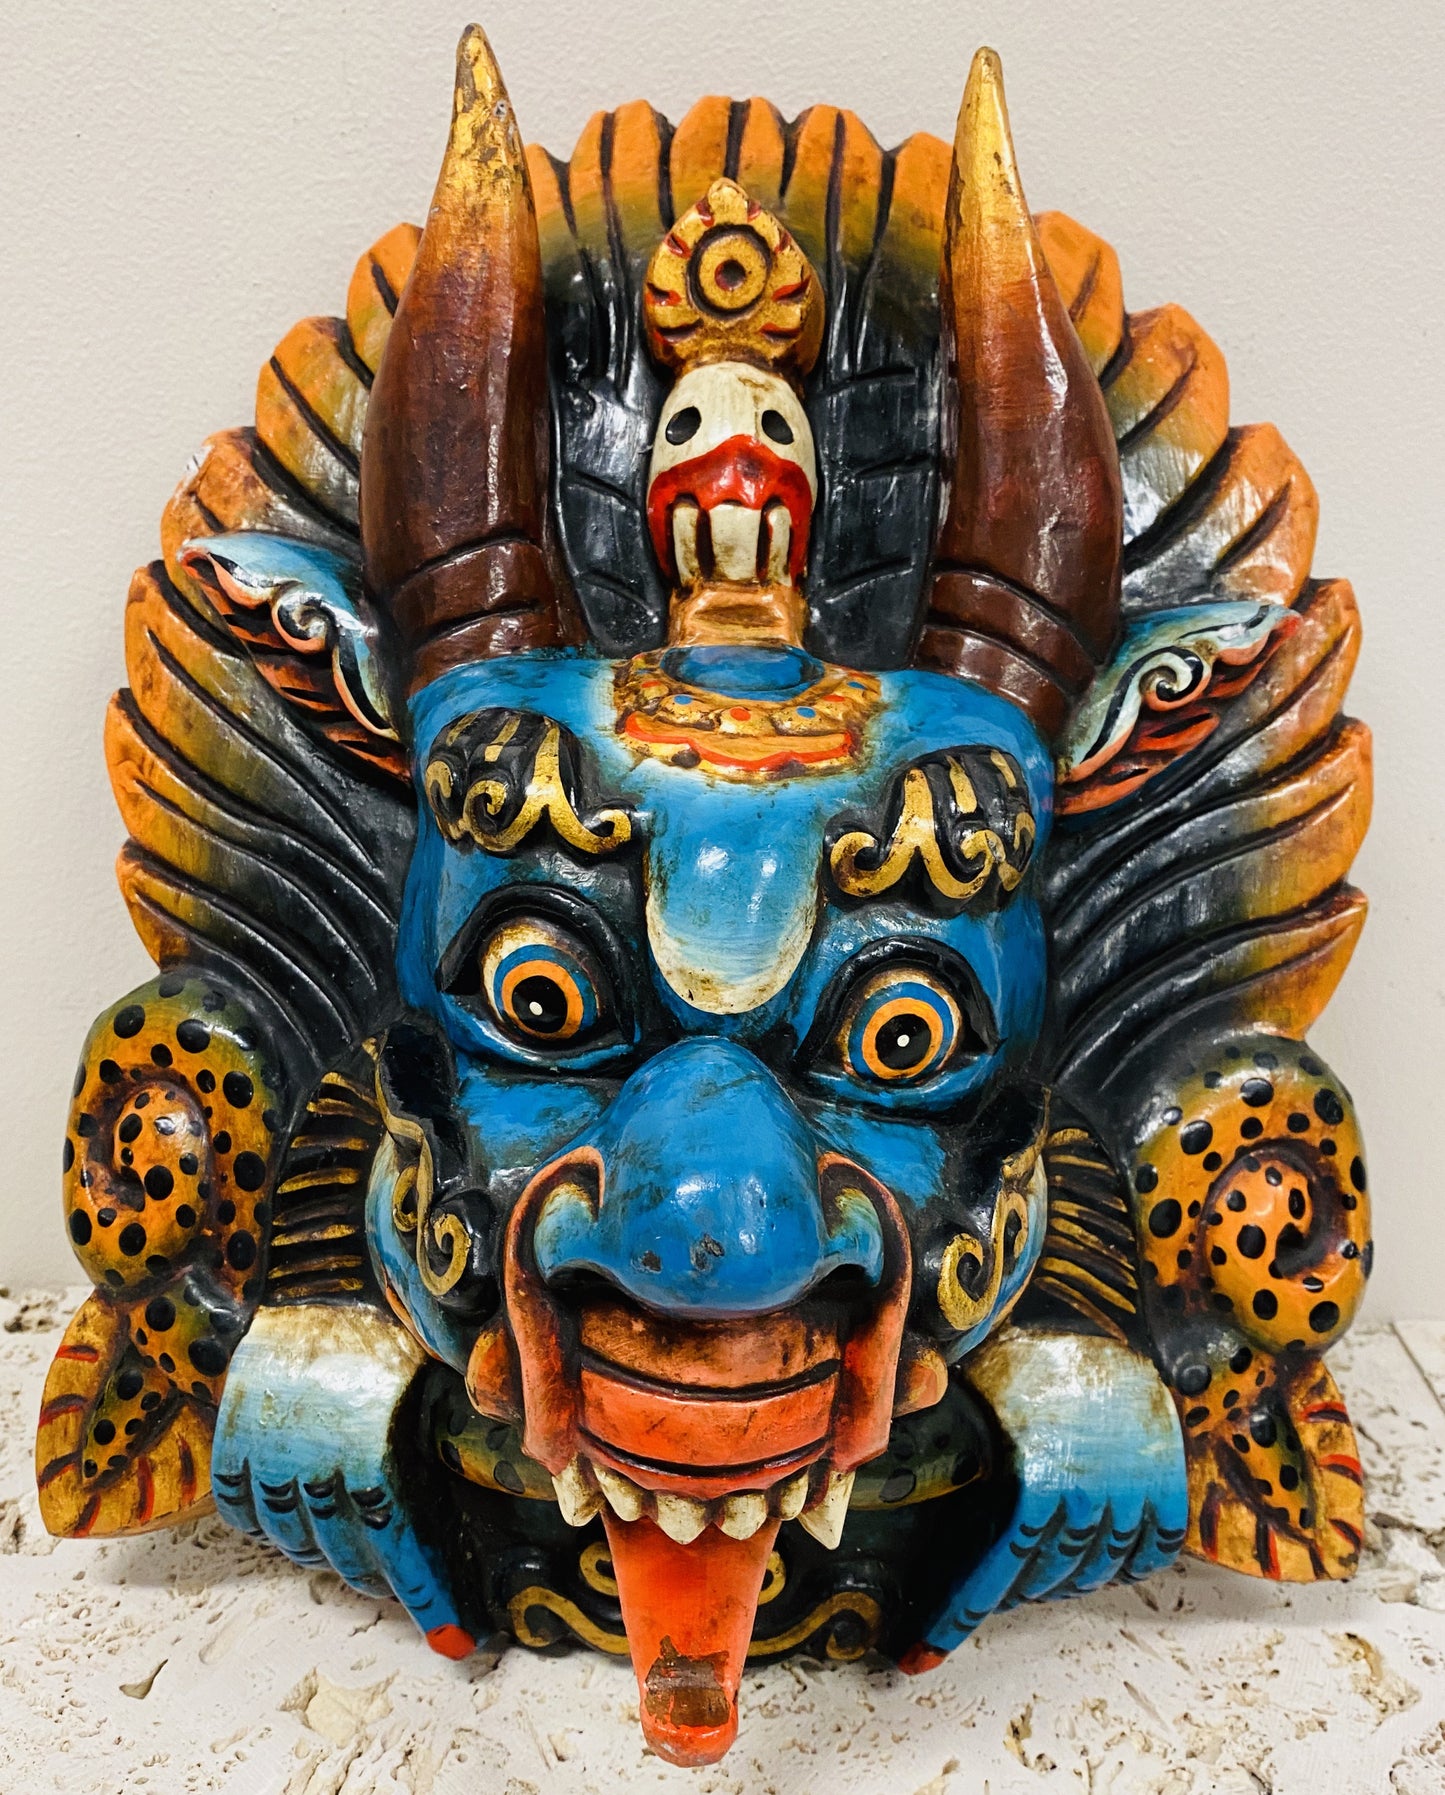 Hand Carved and Painted Cheppu Masks from Nepal